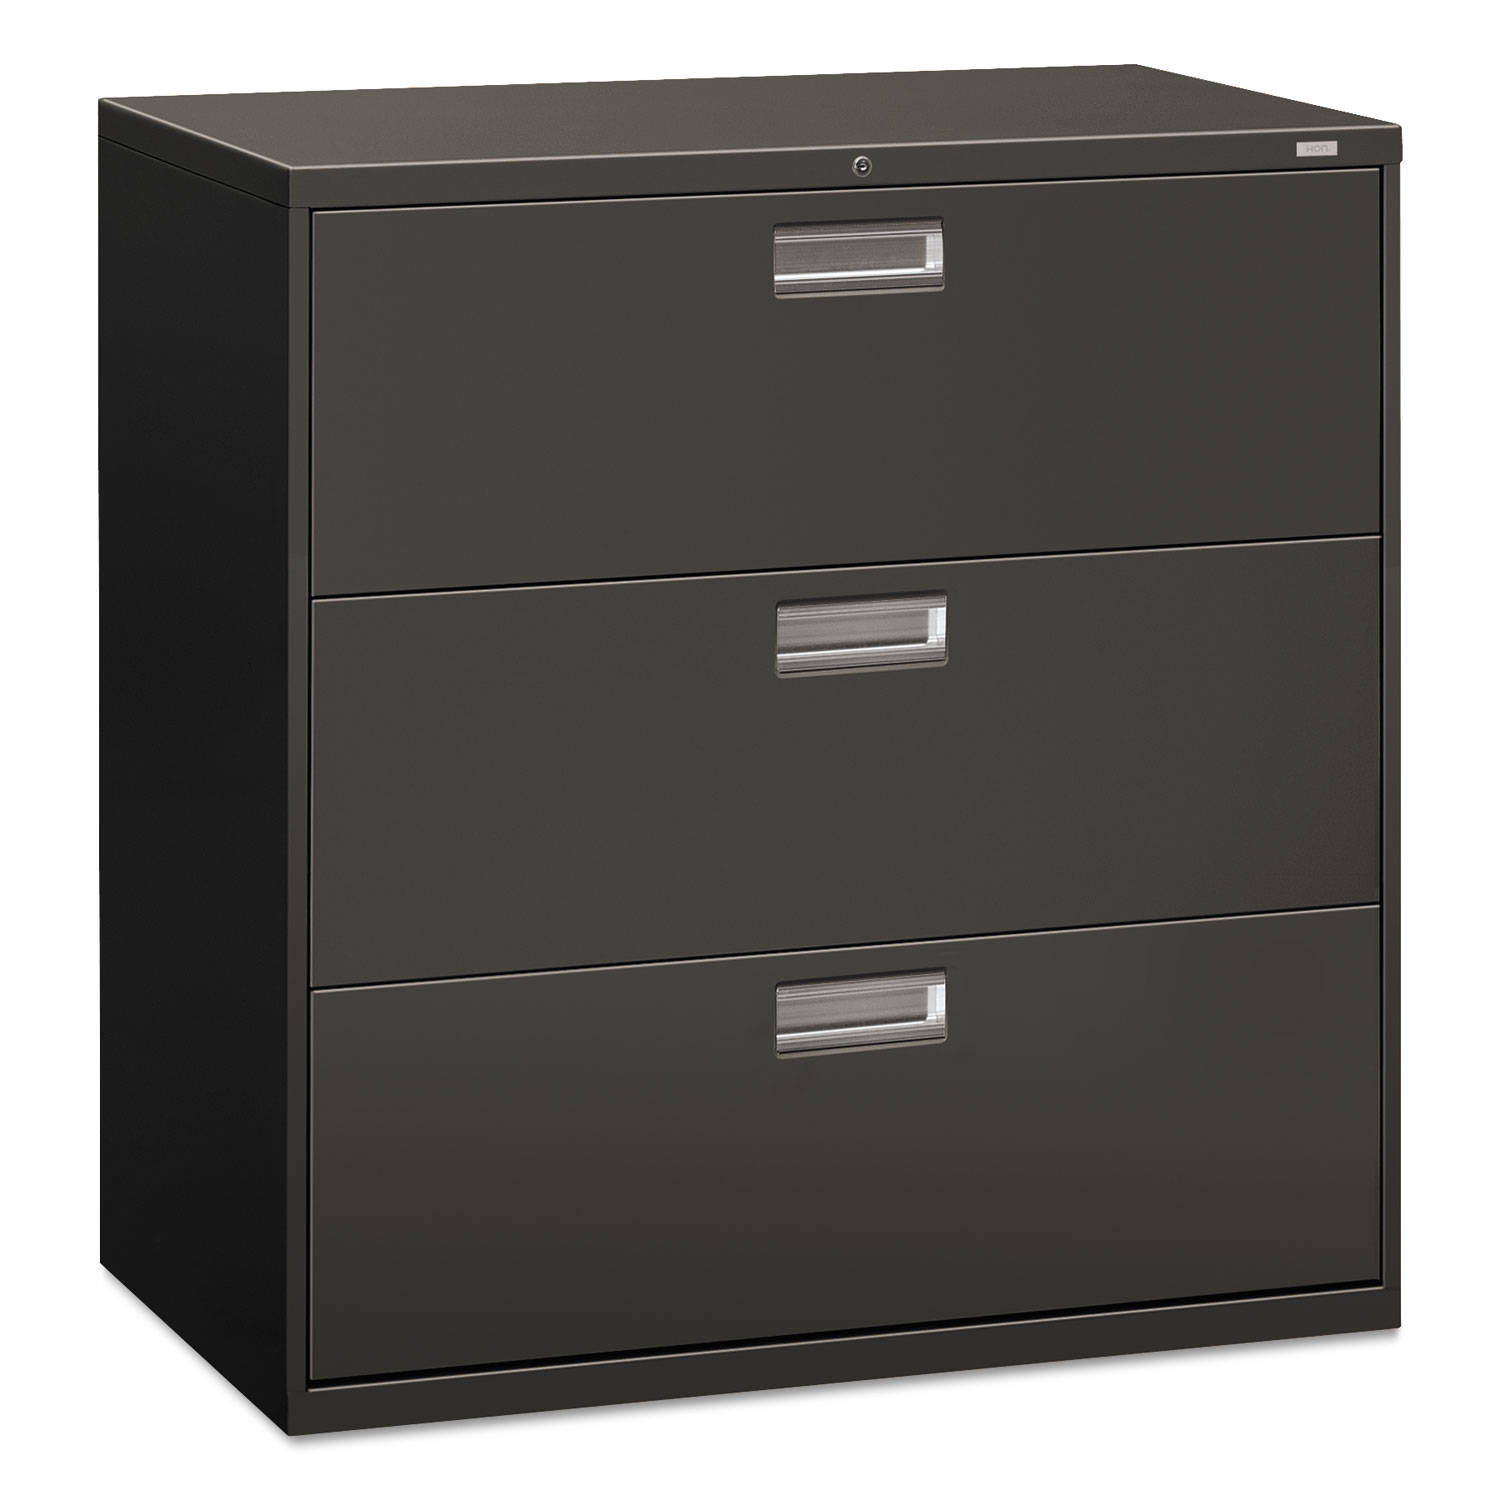 HON 600 Series Three-Drawer Lateral File, 42w x 19-1/4d, Charcoal